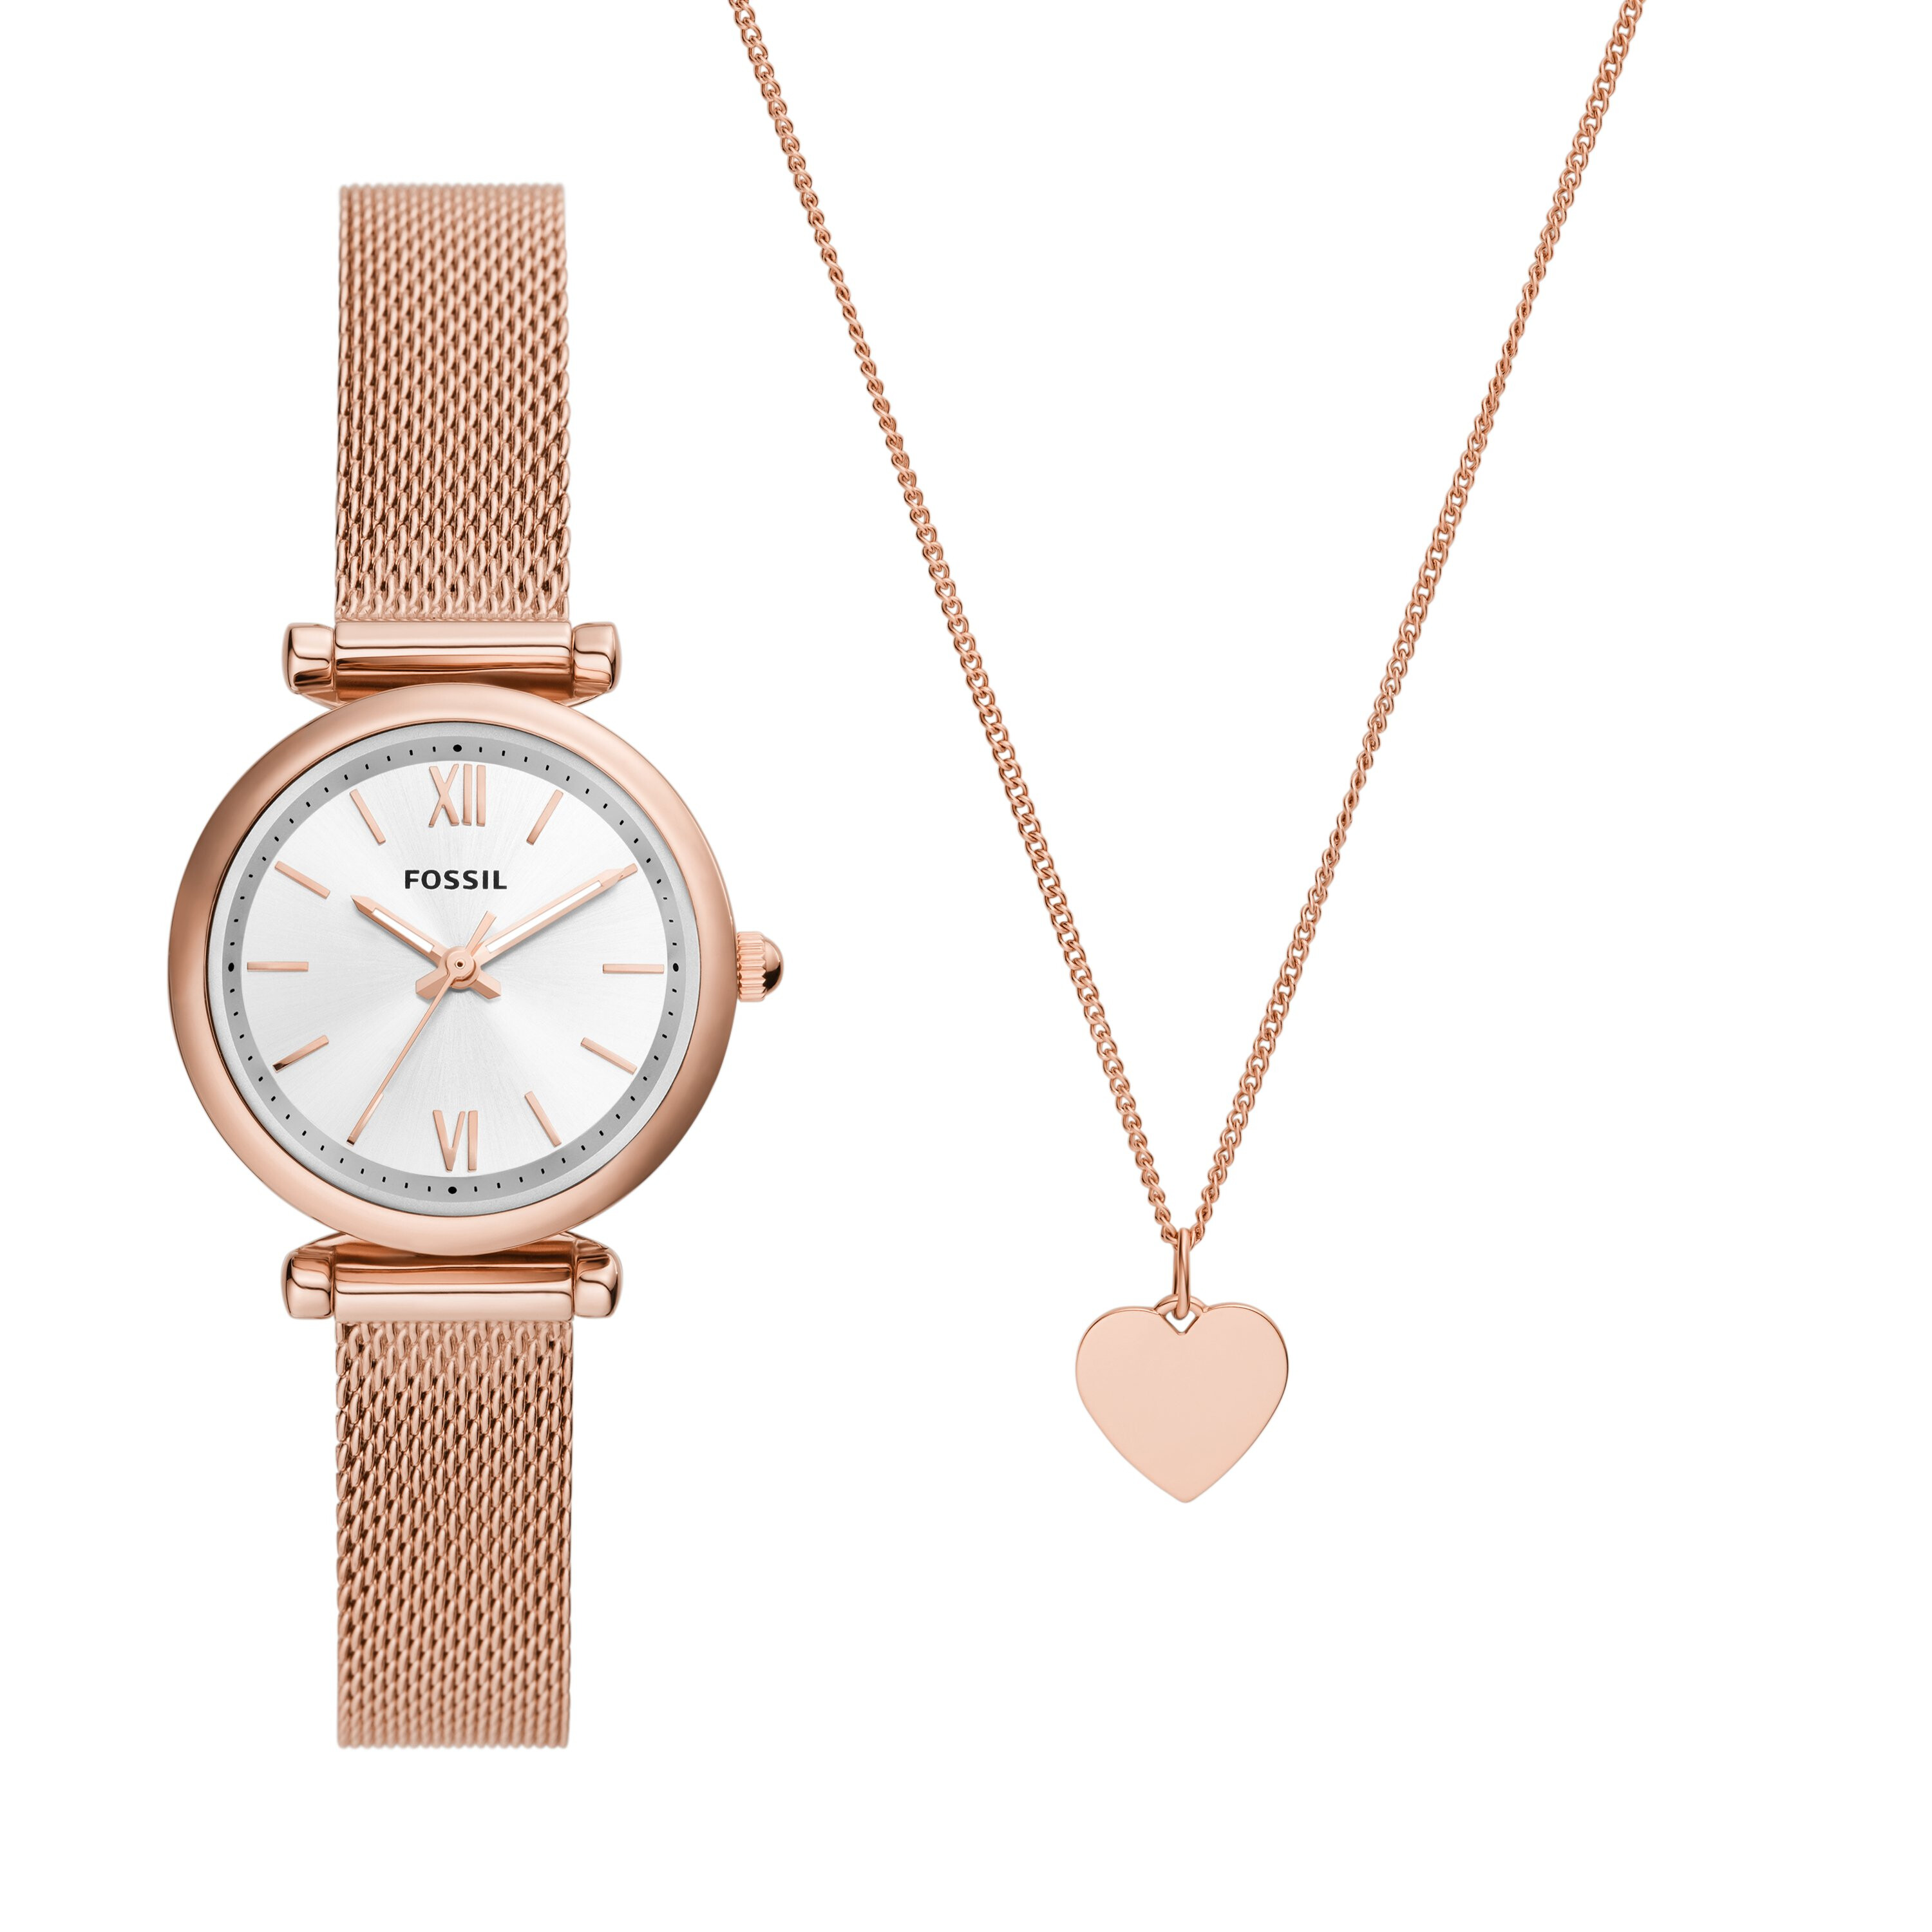 Ceasuri Femei Fossil Carlie Three-Hand Rose Gold-Tone Stainless Steel Mesh Watch and Necklace Box Set - ES5314SET Rose Gold